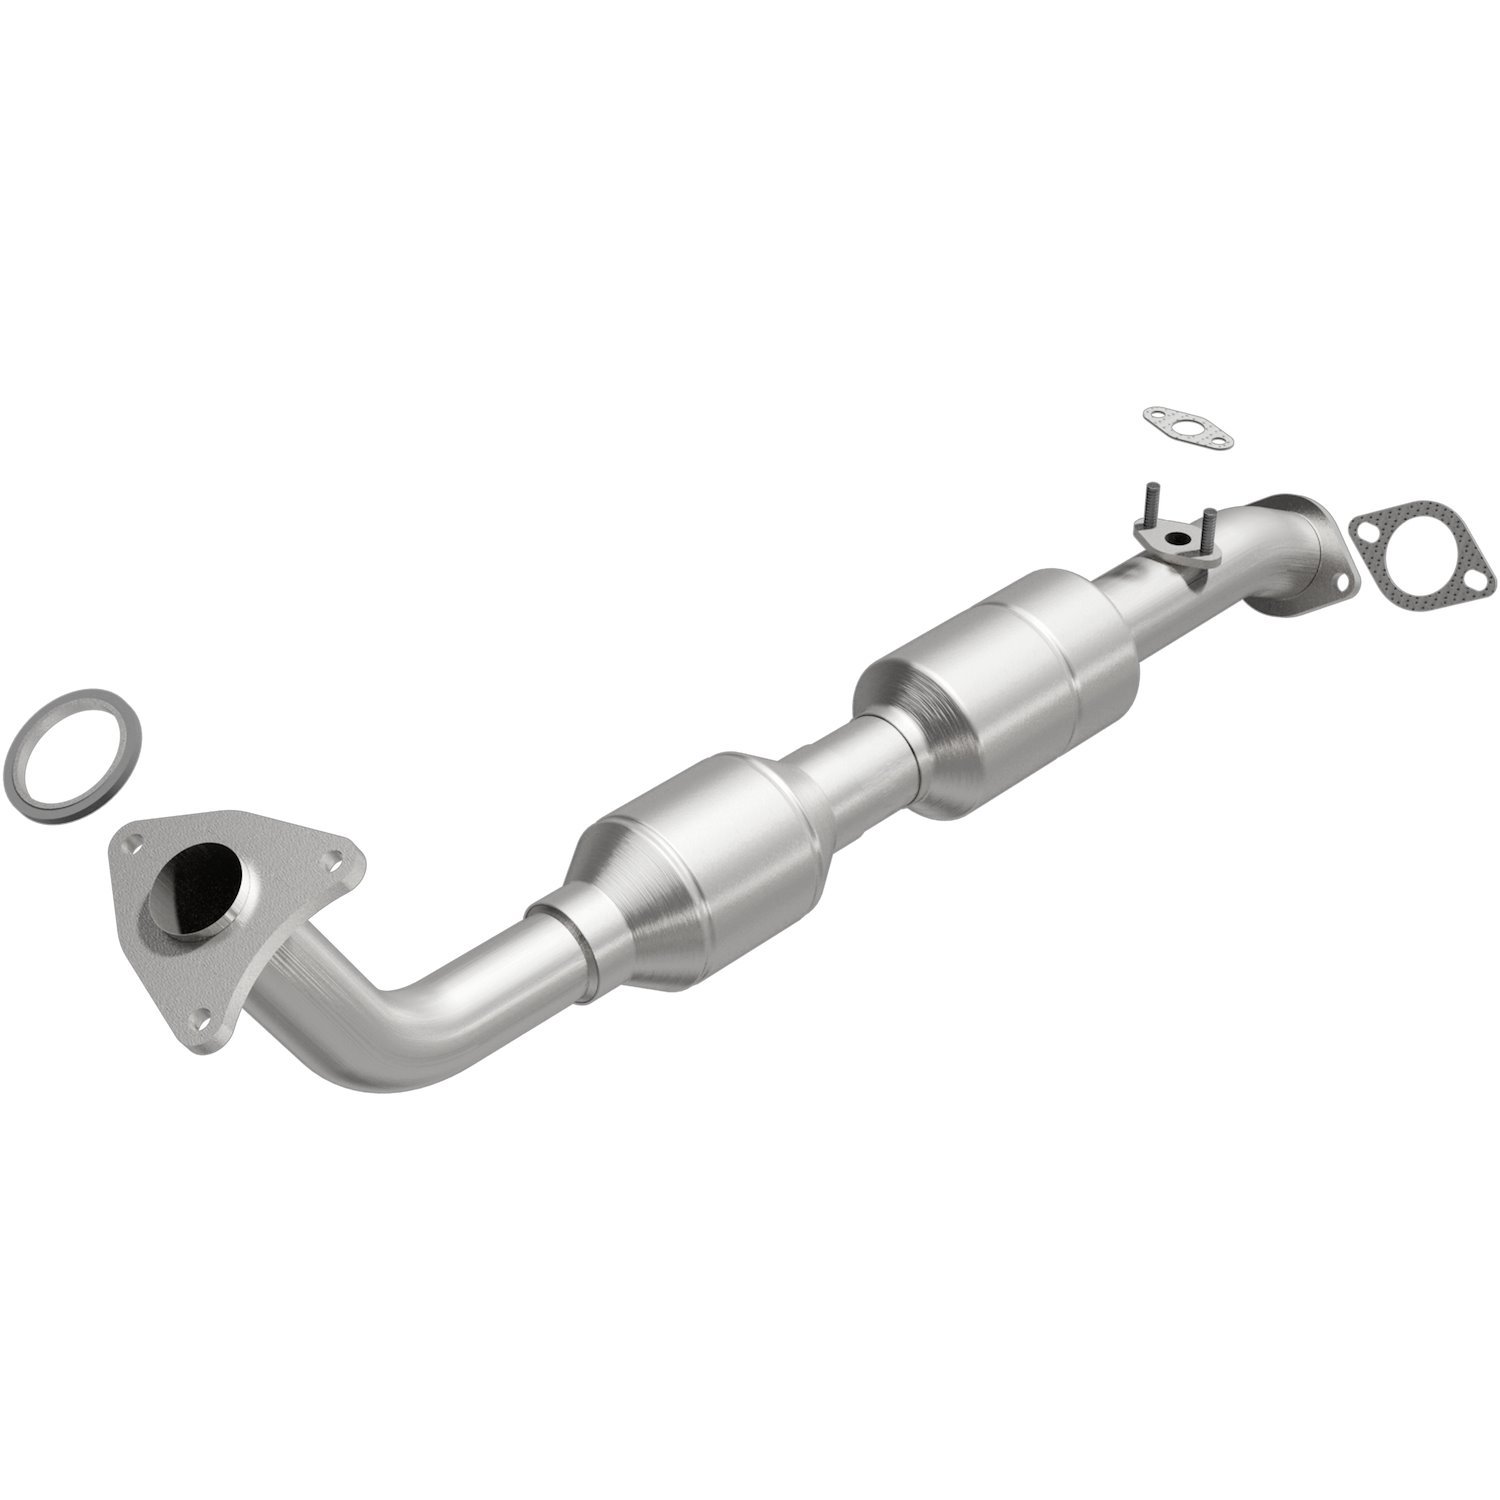 HM Grade Federal / EPA Compliant Direct-Fit Catalytic Converter 93142